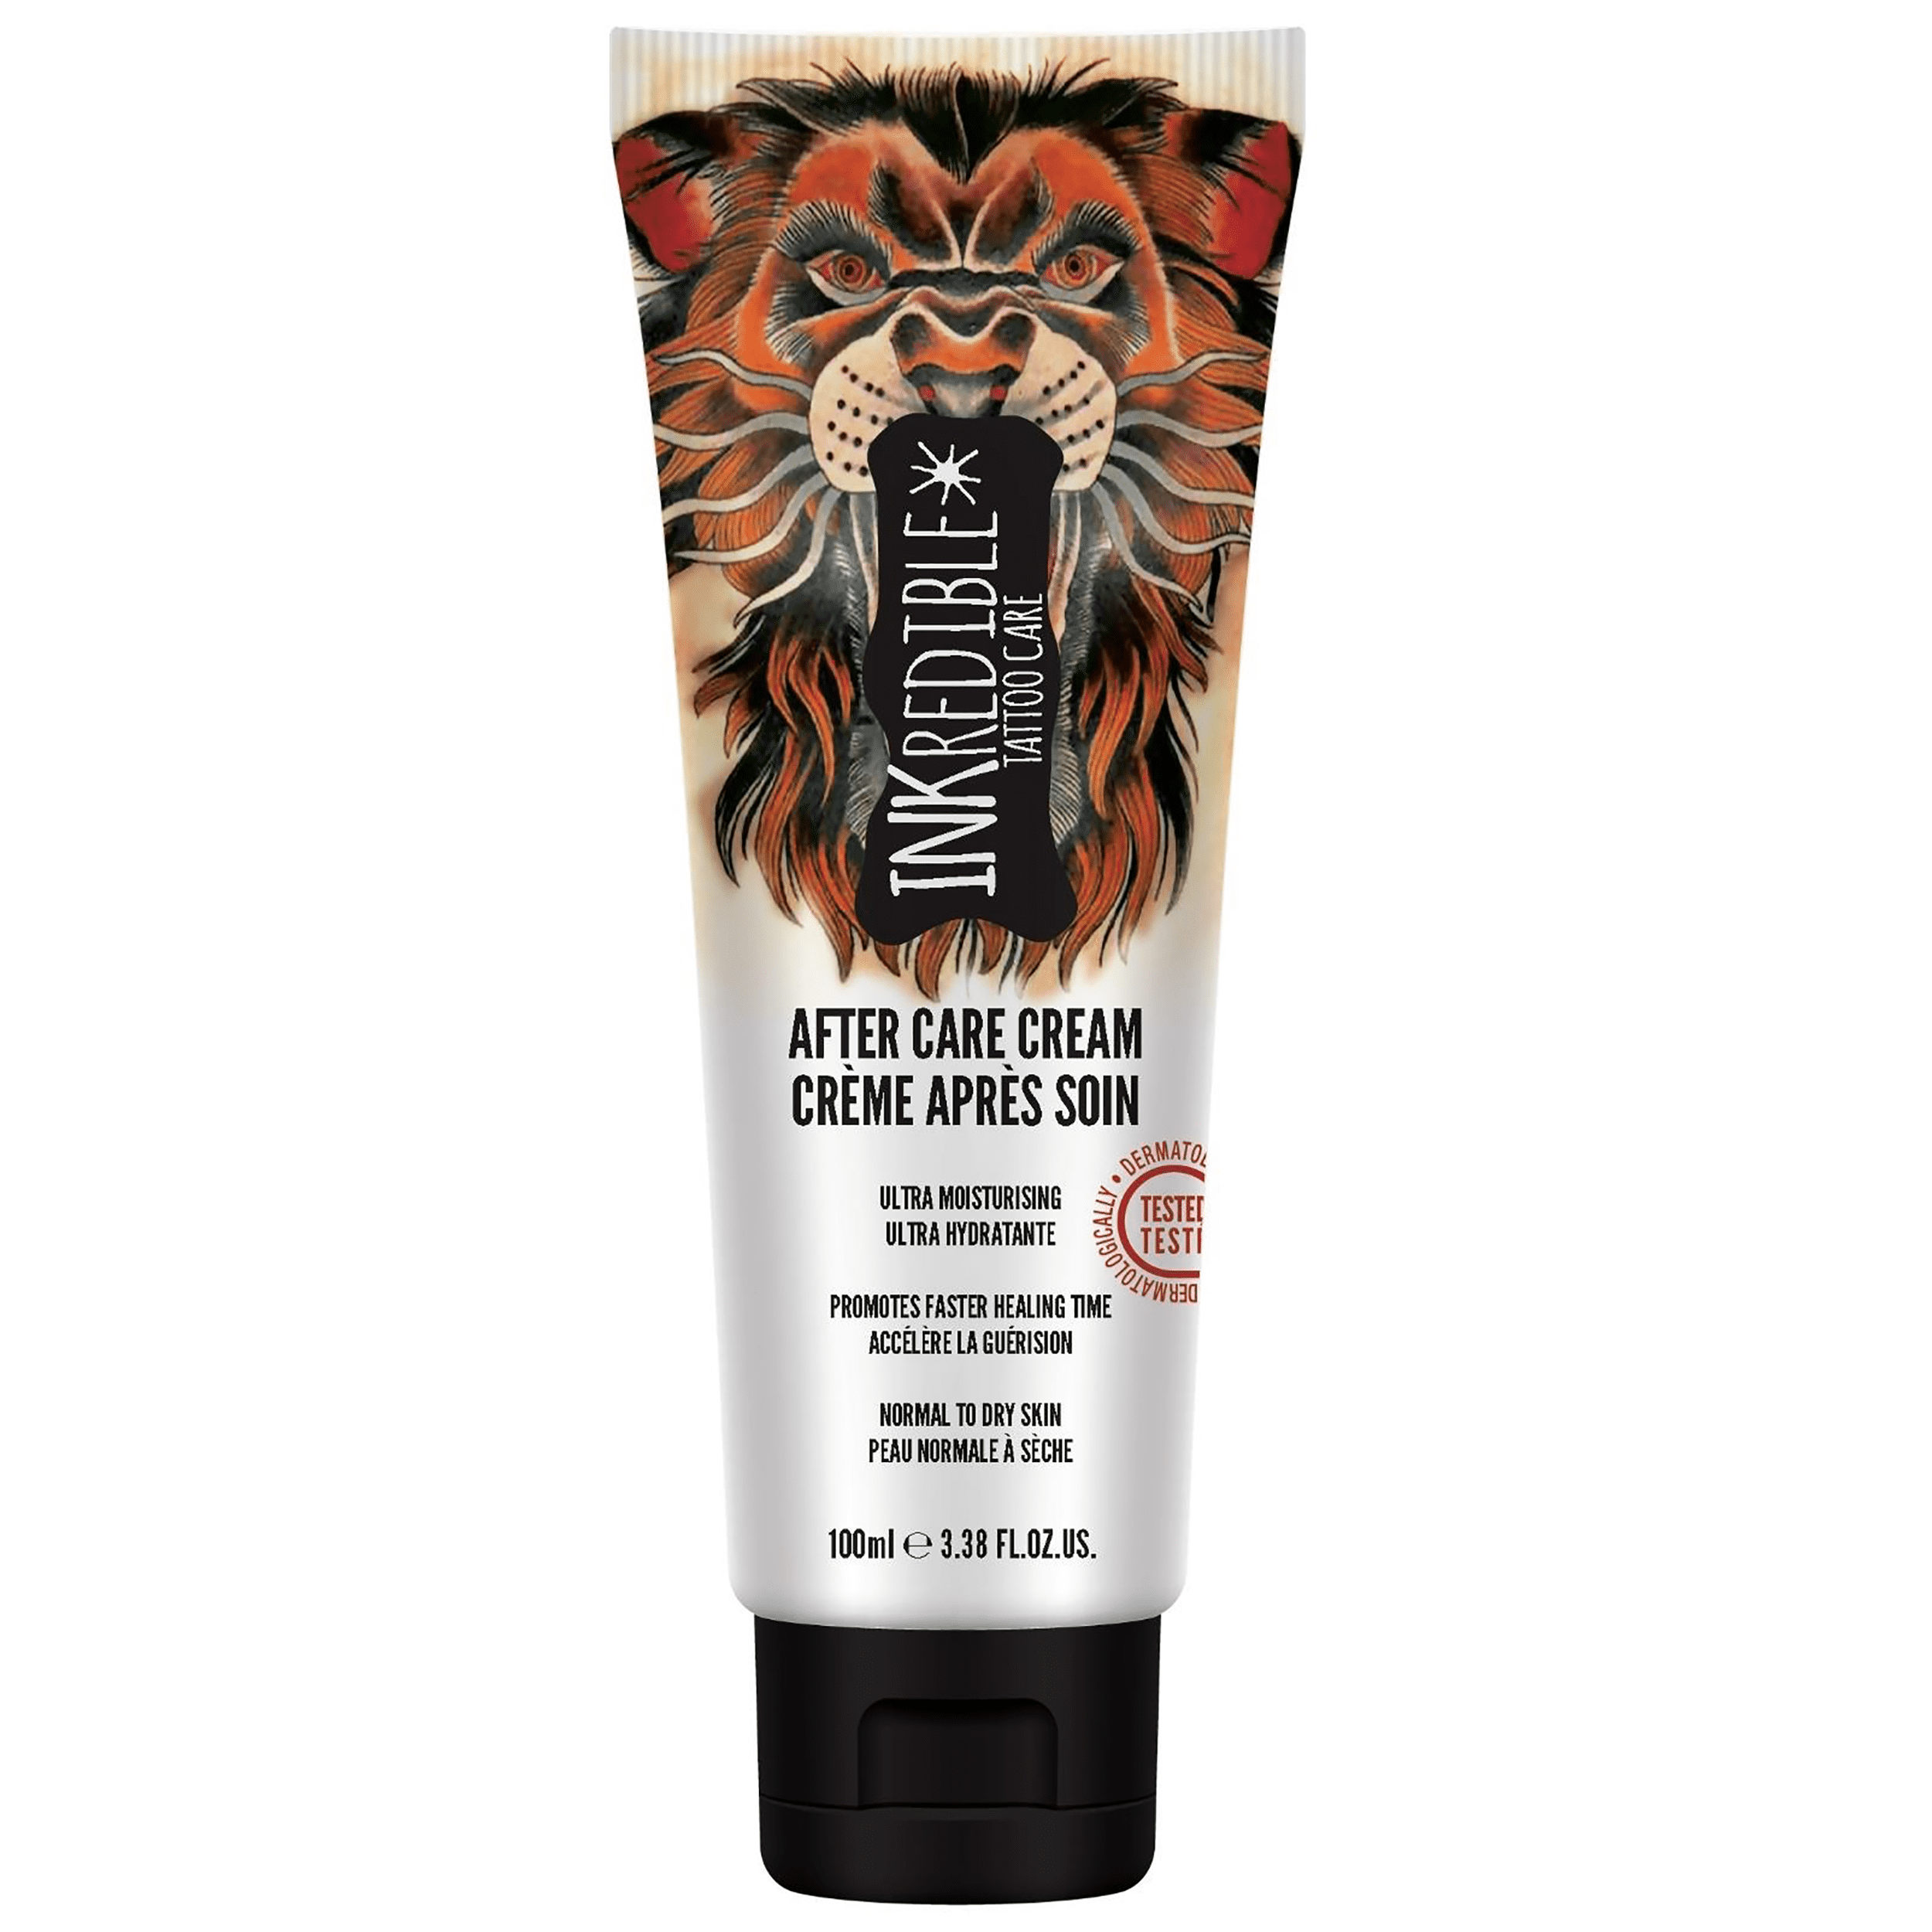 5 Worst Lotions & Products for Tattoos | Hush Anesthetic